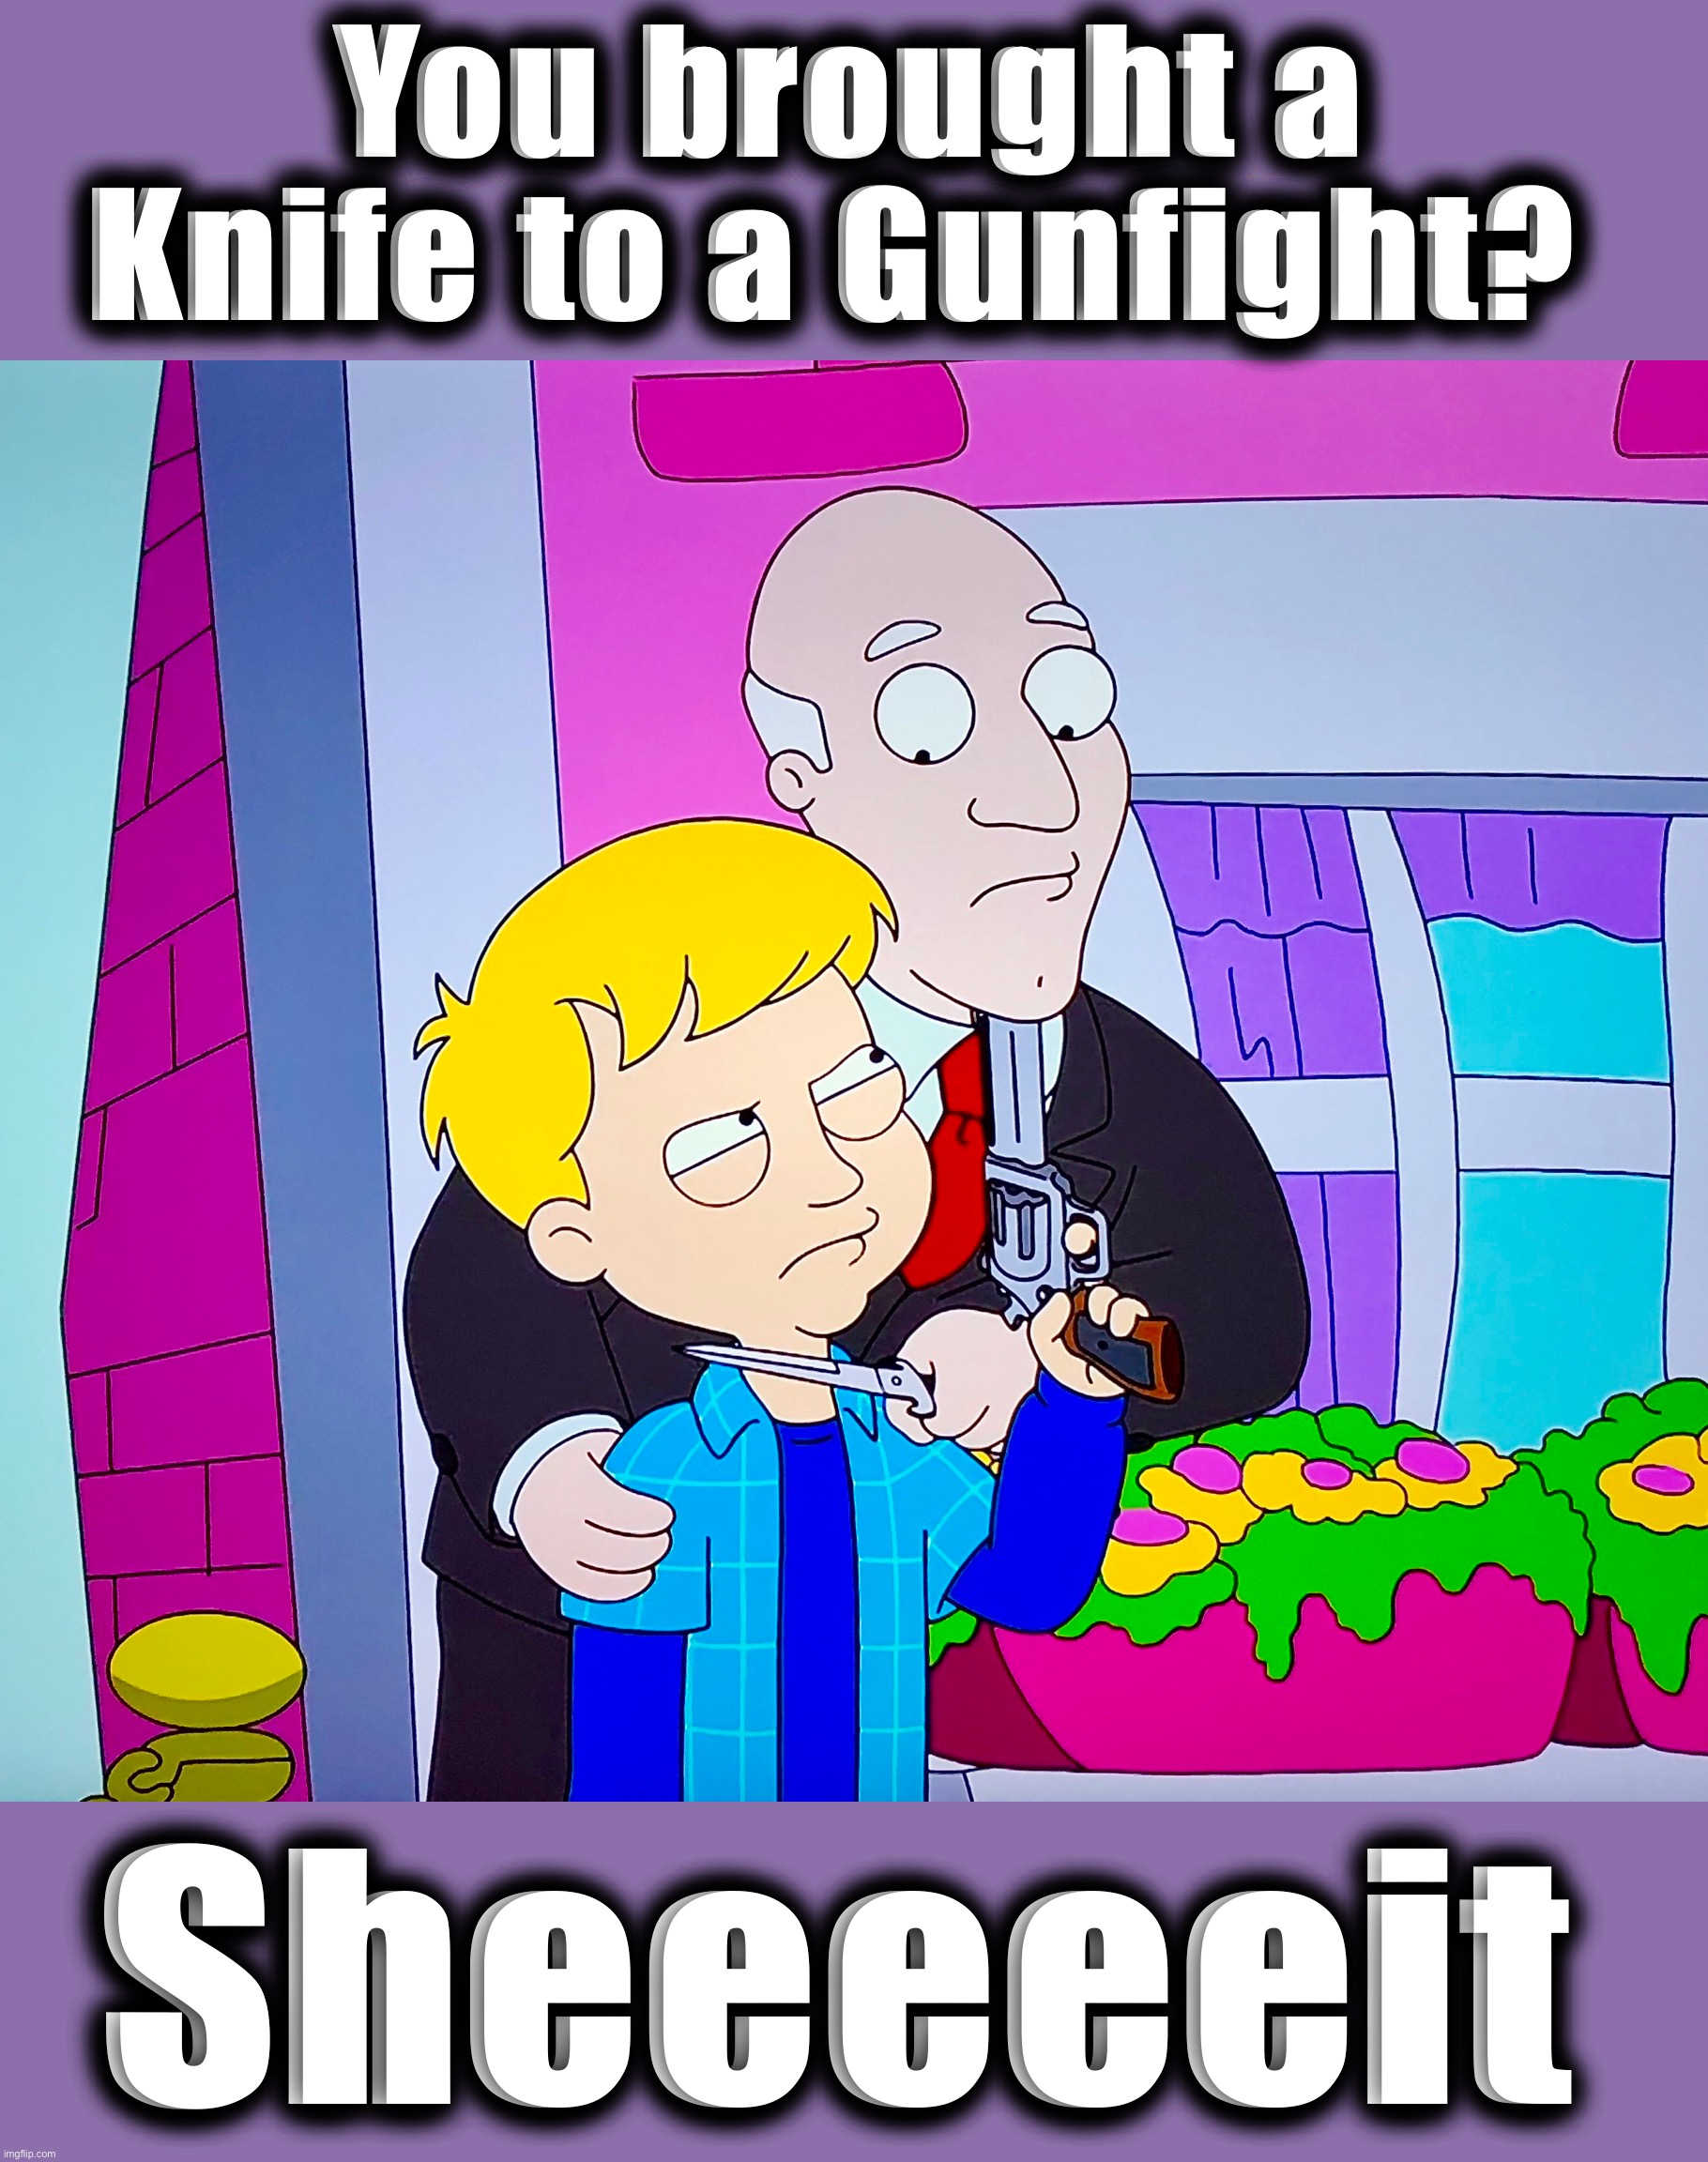 Things are getting real | You brought a Knife to a Gunfight? Sheeeeeit | image tagged in knife to a gunfight,memes,american dad,gun violence,knife,fail | made w/ Imgflip meme maker